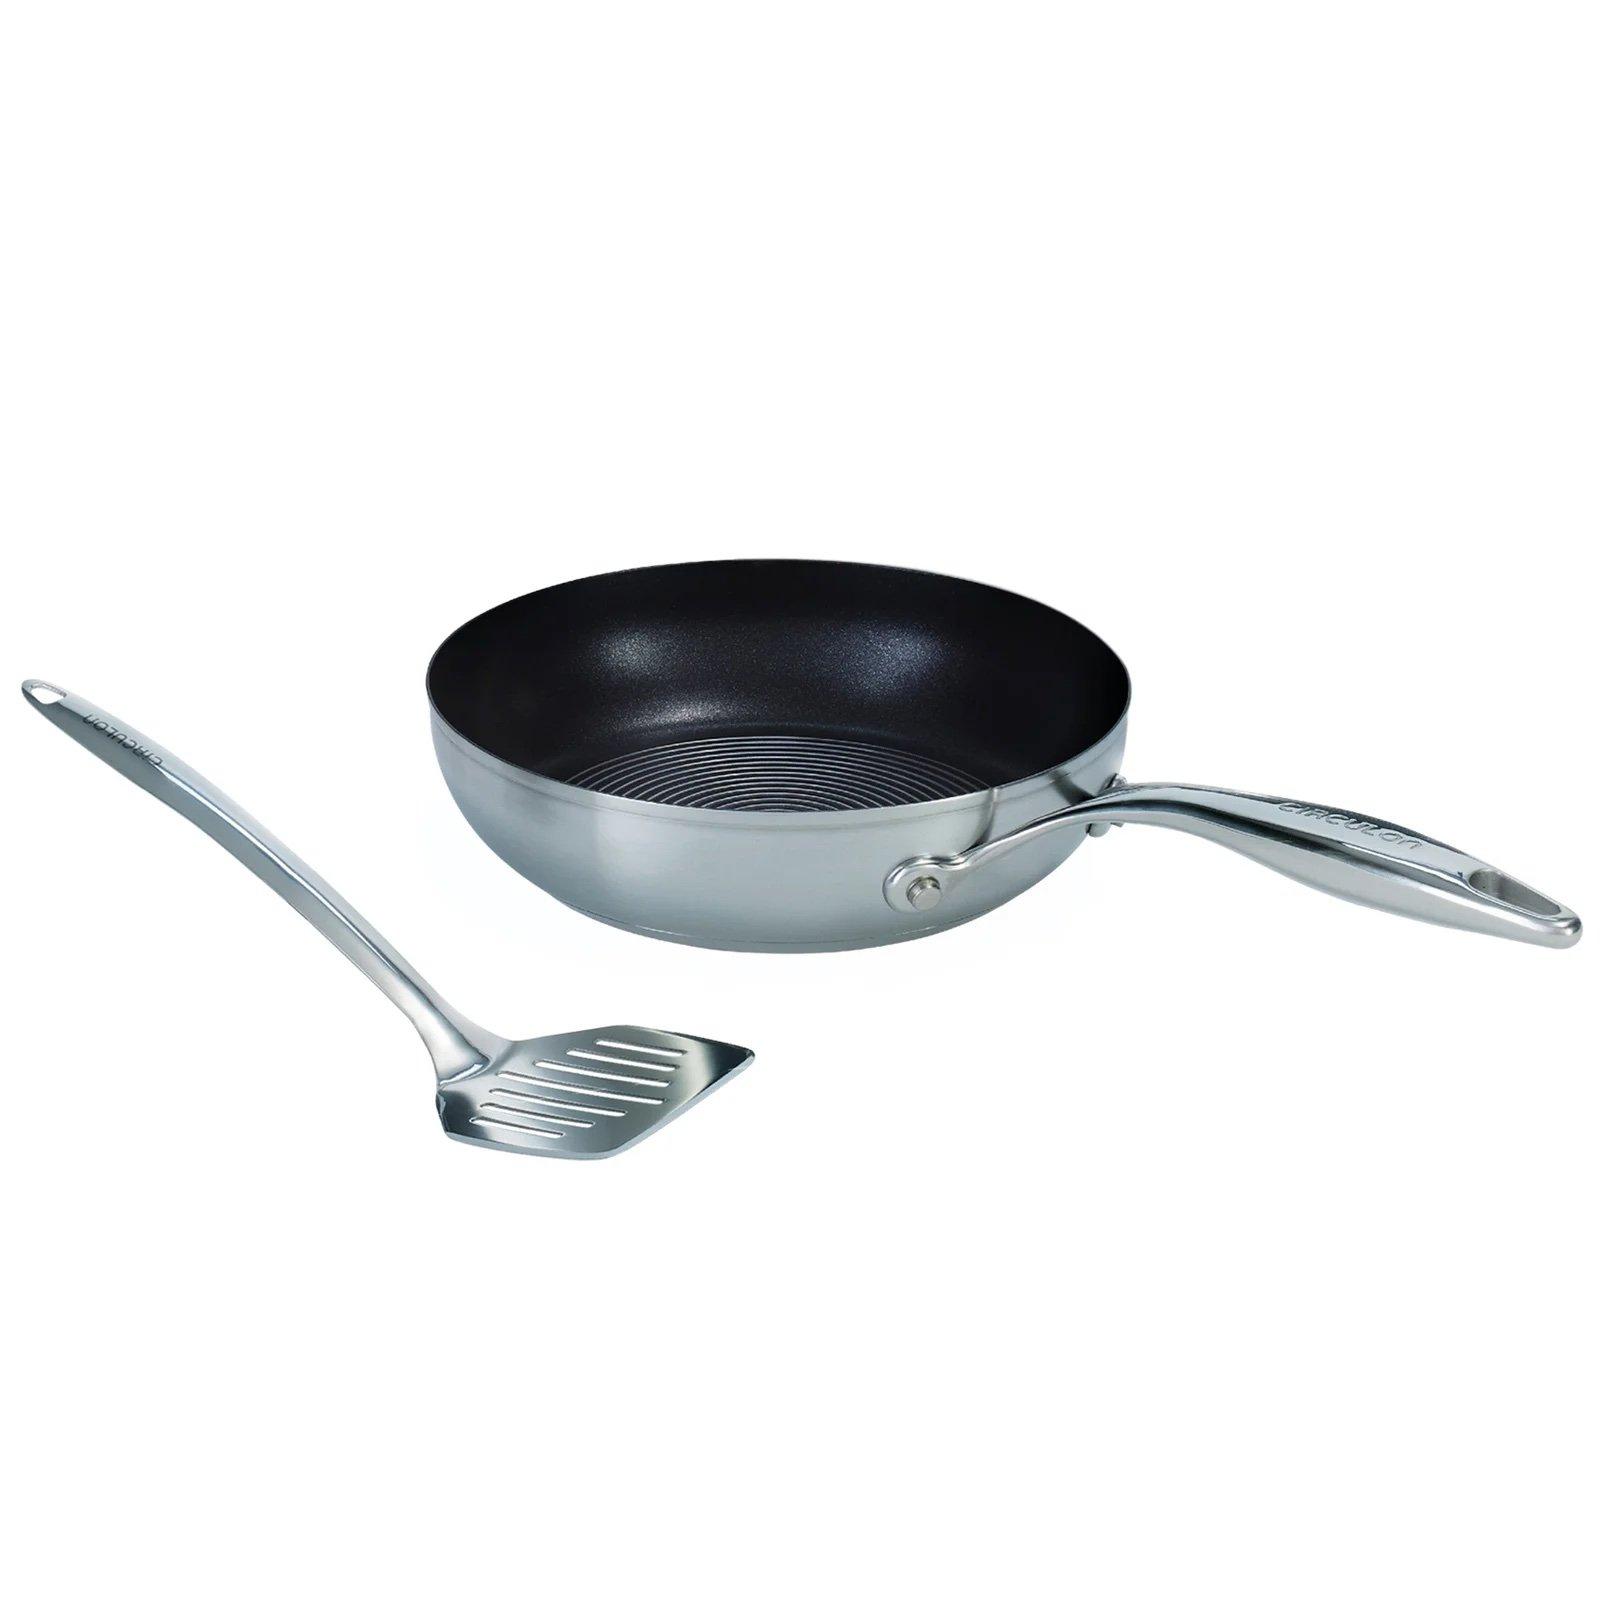 Frying Pan in Stainless Steel with Slotted Turner - Non Stick - 24 cm